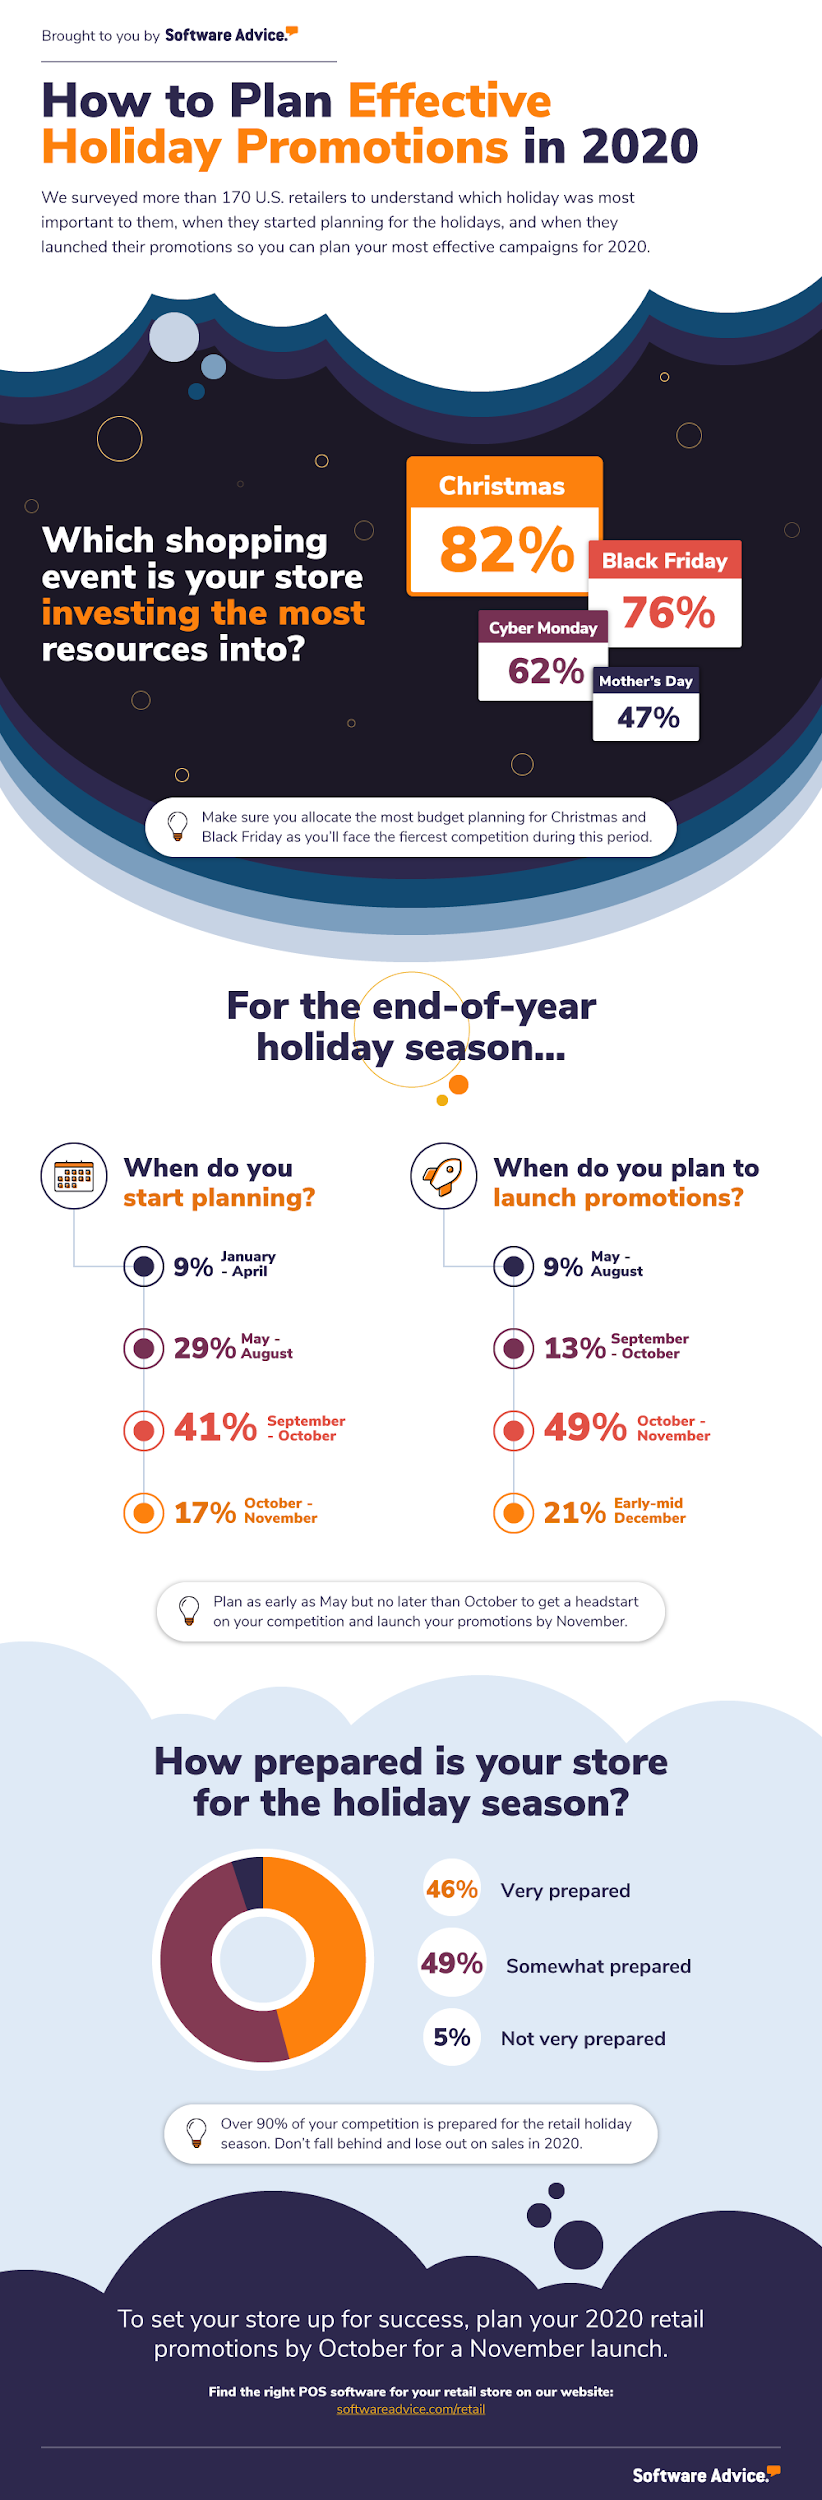 Software Advice infographic: How to Plan Effective Holiday Promotions in 2020